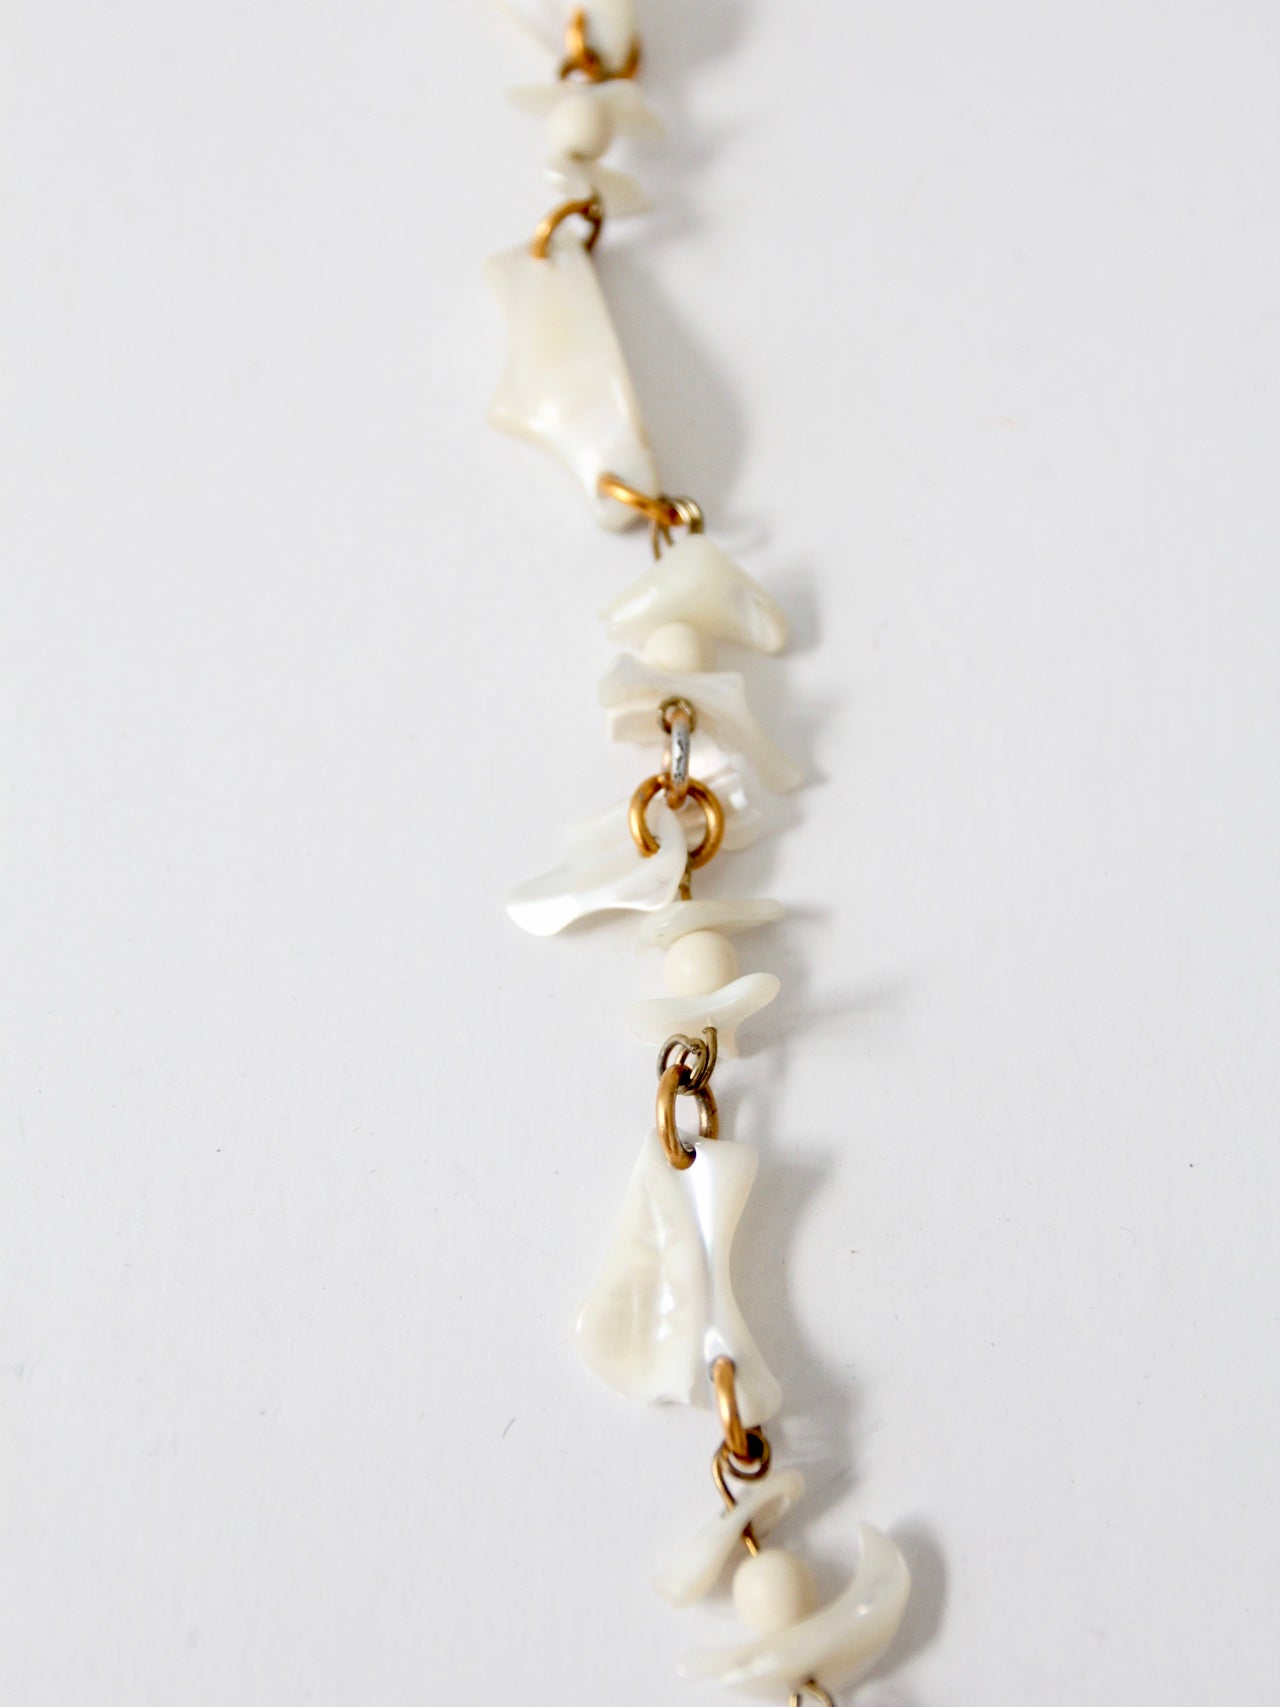 vintage mother of pearl strand necklace